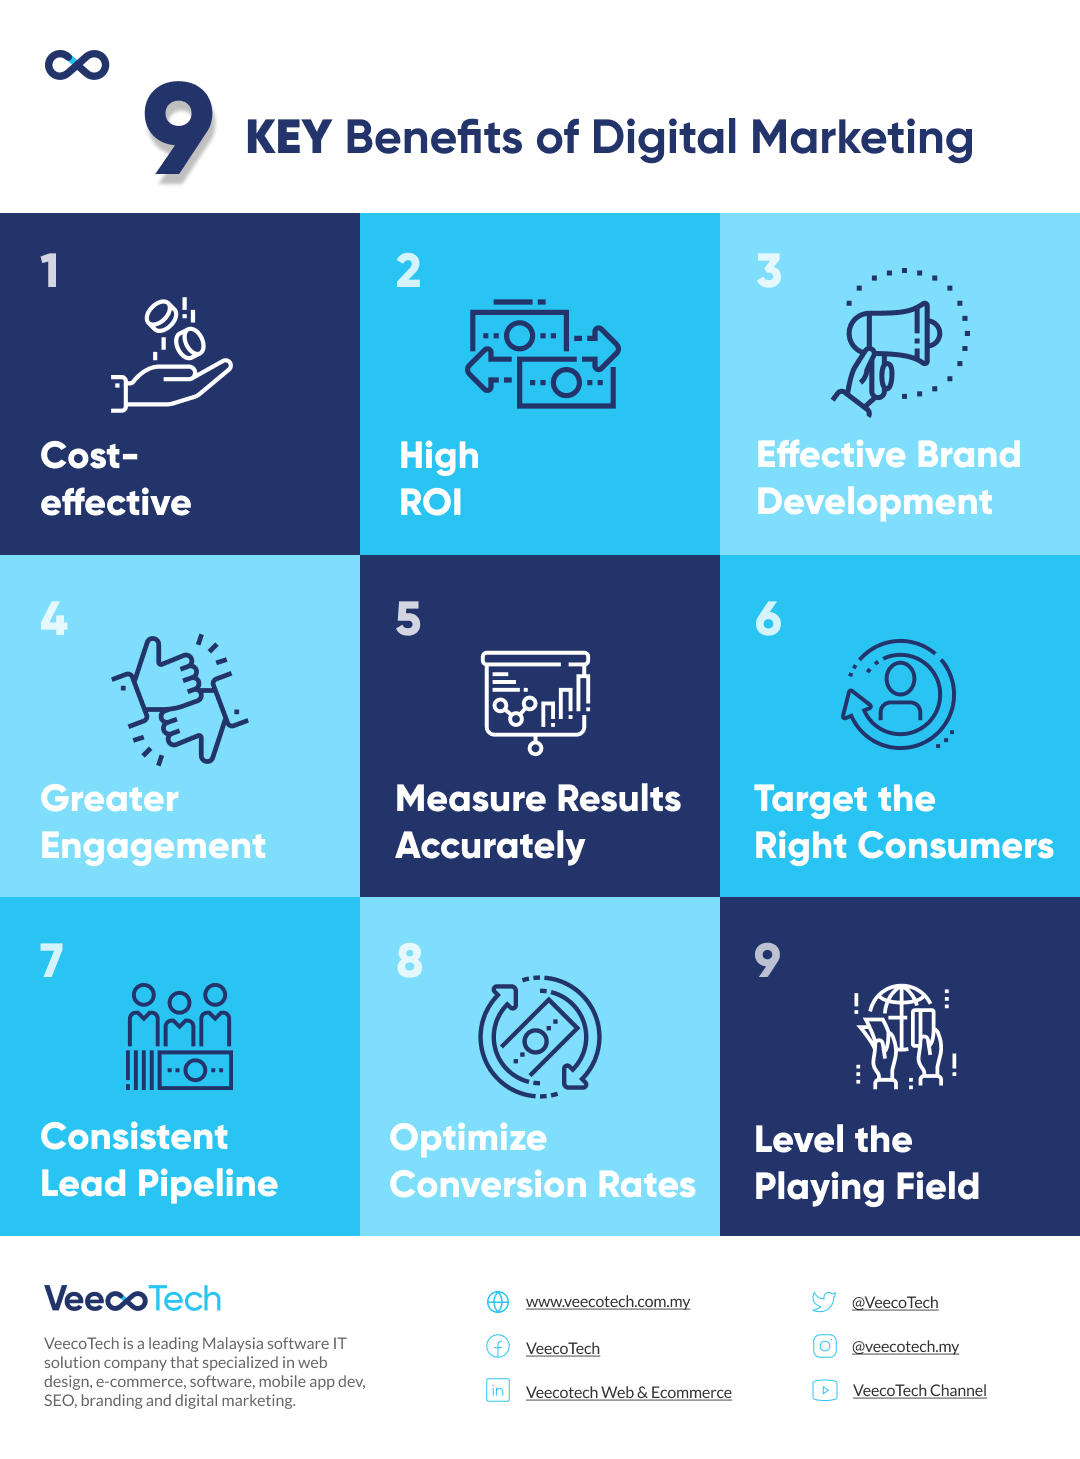 a summary of the 9 benefits of digital marketing